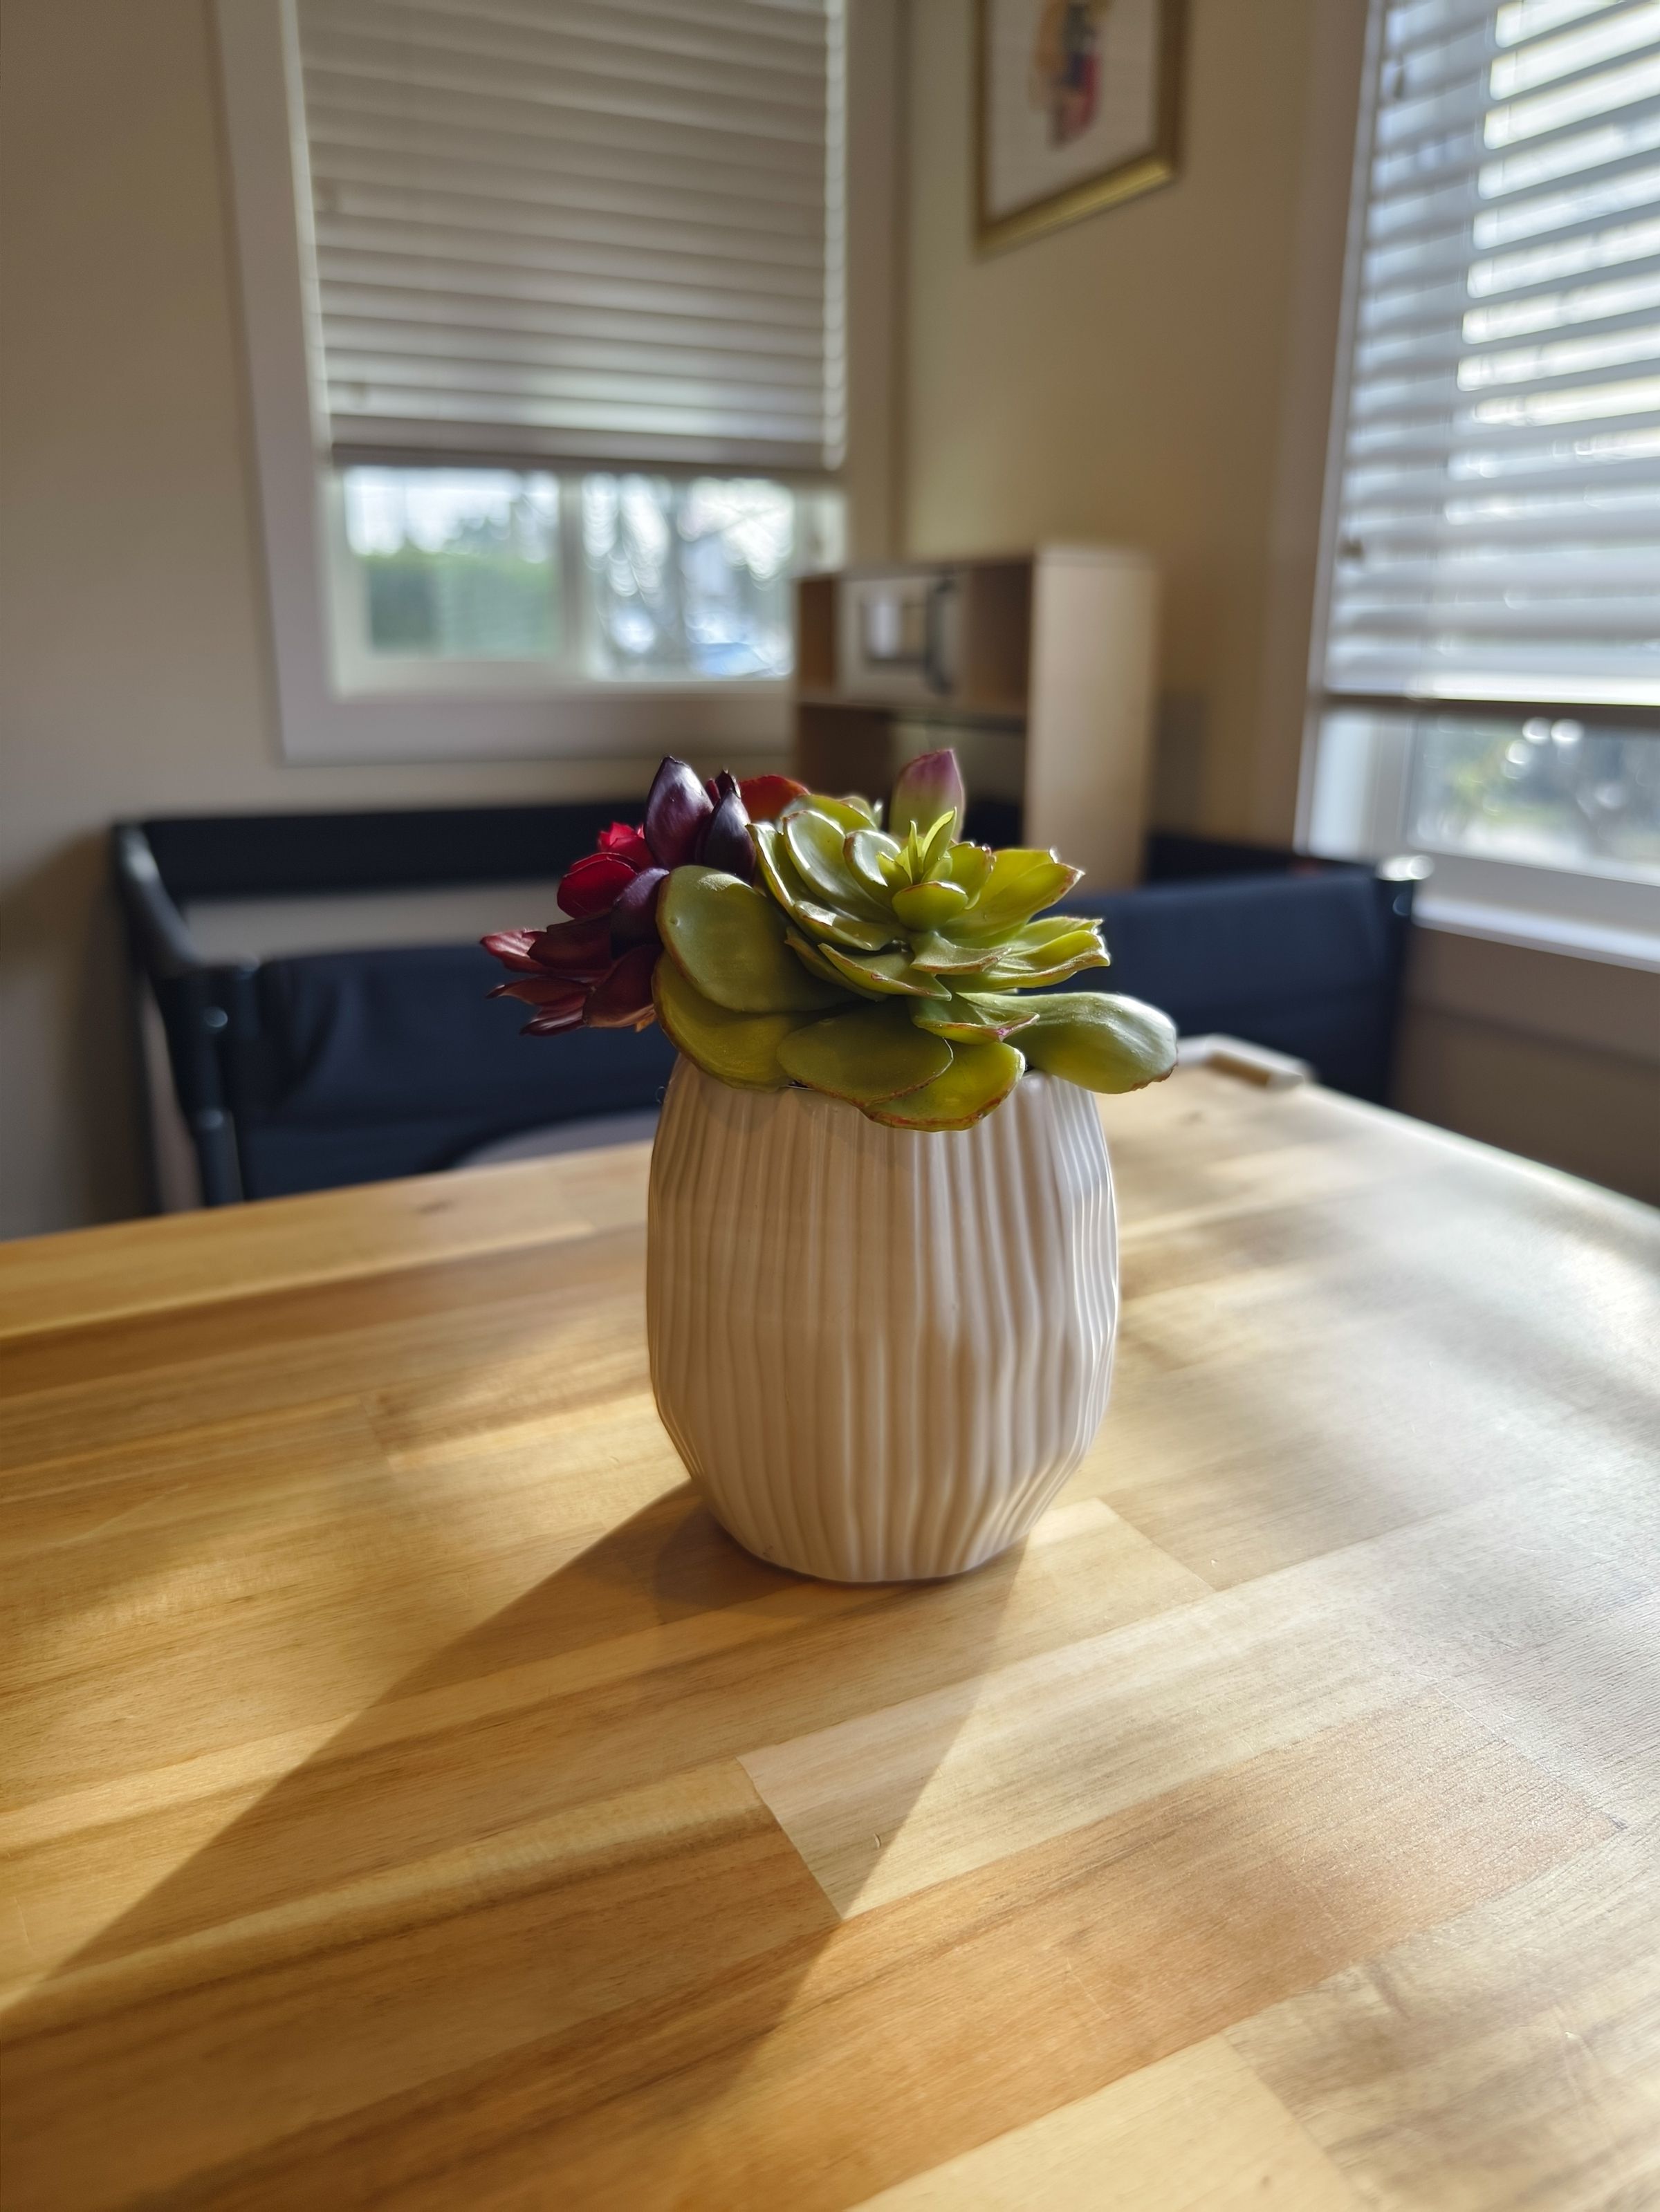 Photo of a fake succulent on a tabletop with blurred background.